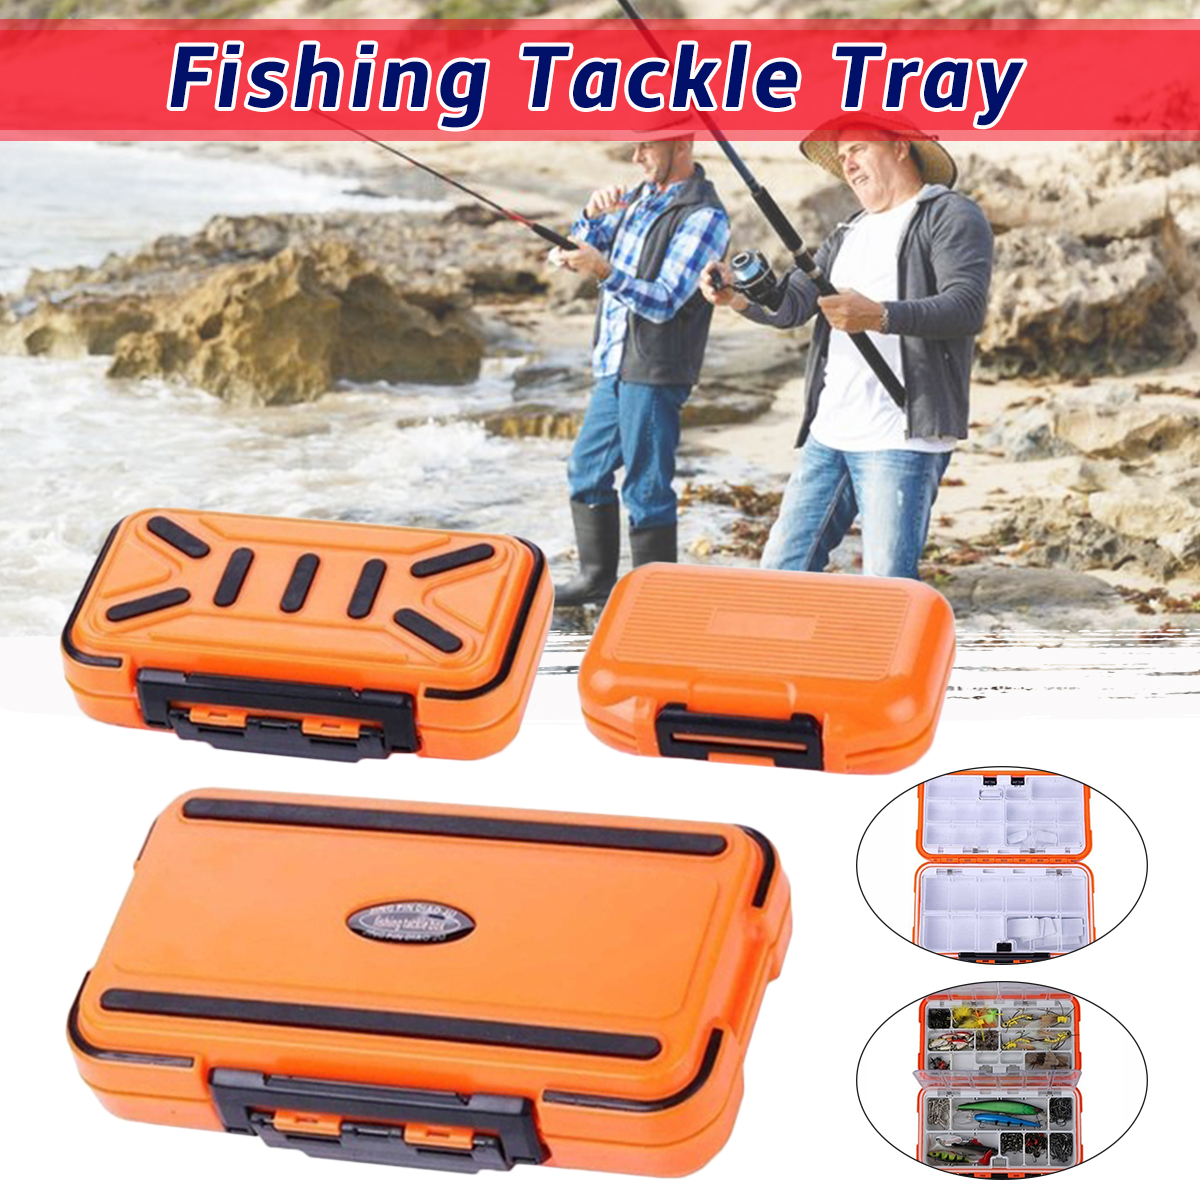 Sealed-Waterproof-Fishing-Tackle-Tray-ABS-Plastic-Fishing-Accessories-Box-Swivel-Snap-Lure--Parts-St-1634862-1